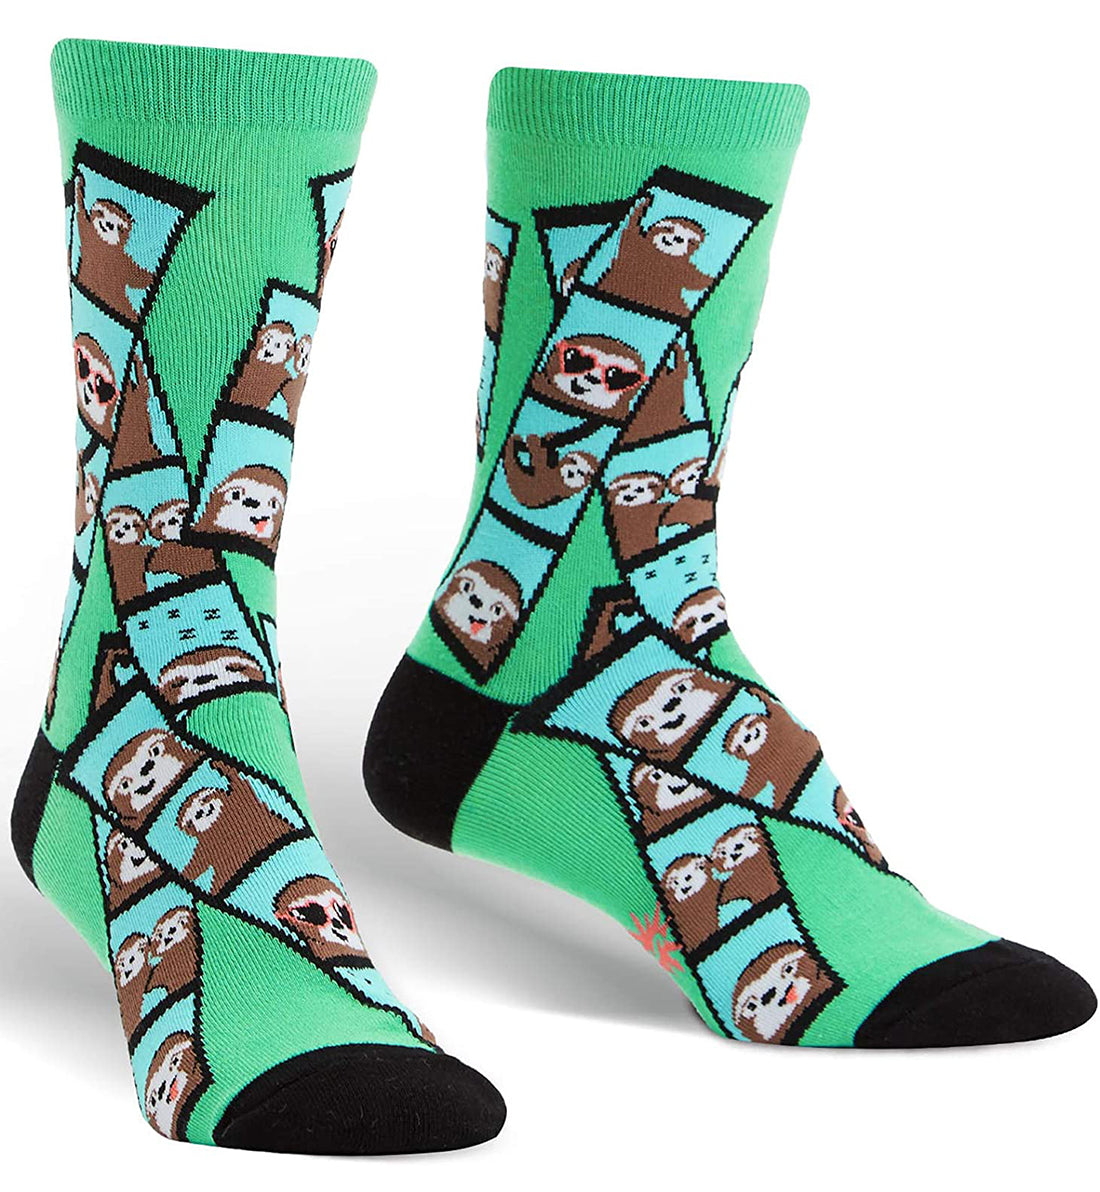 SOCK it to me Women&#39;s Crew Socks (w0215),Oh Snap! - Oh Snap!,One Size